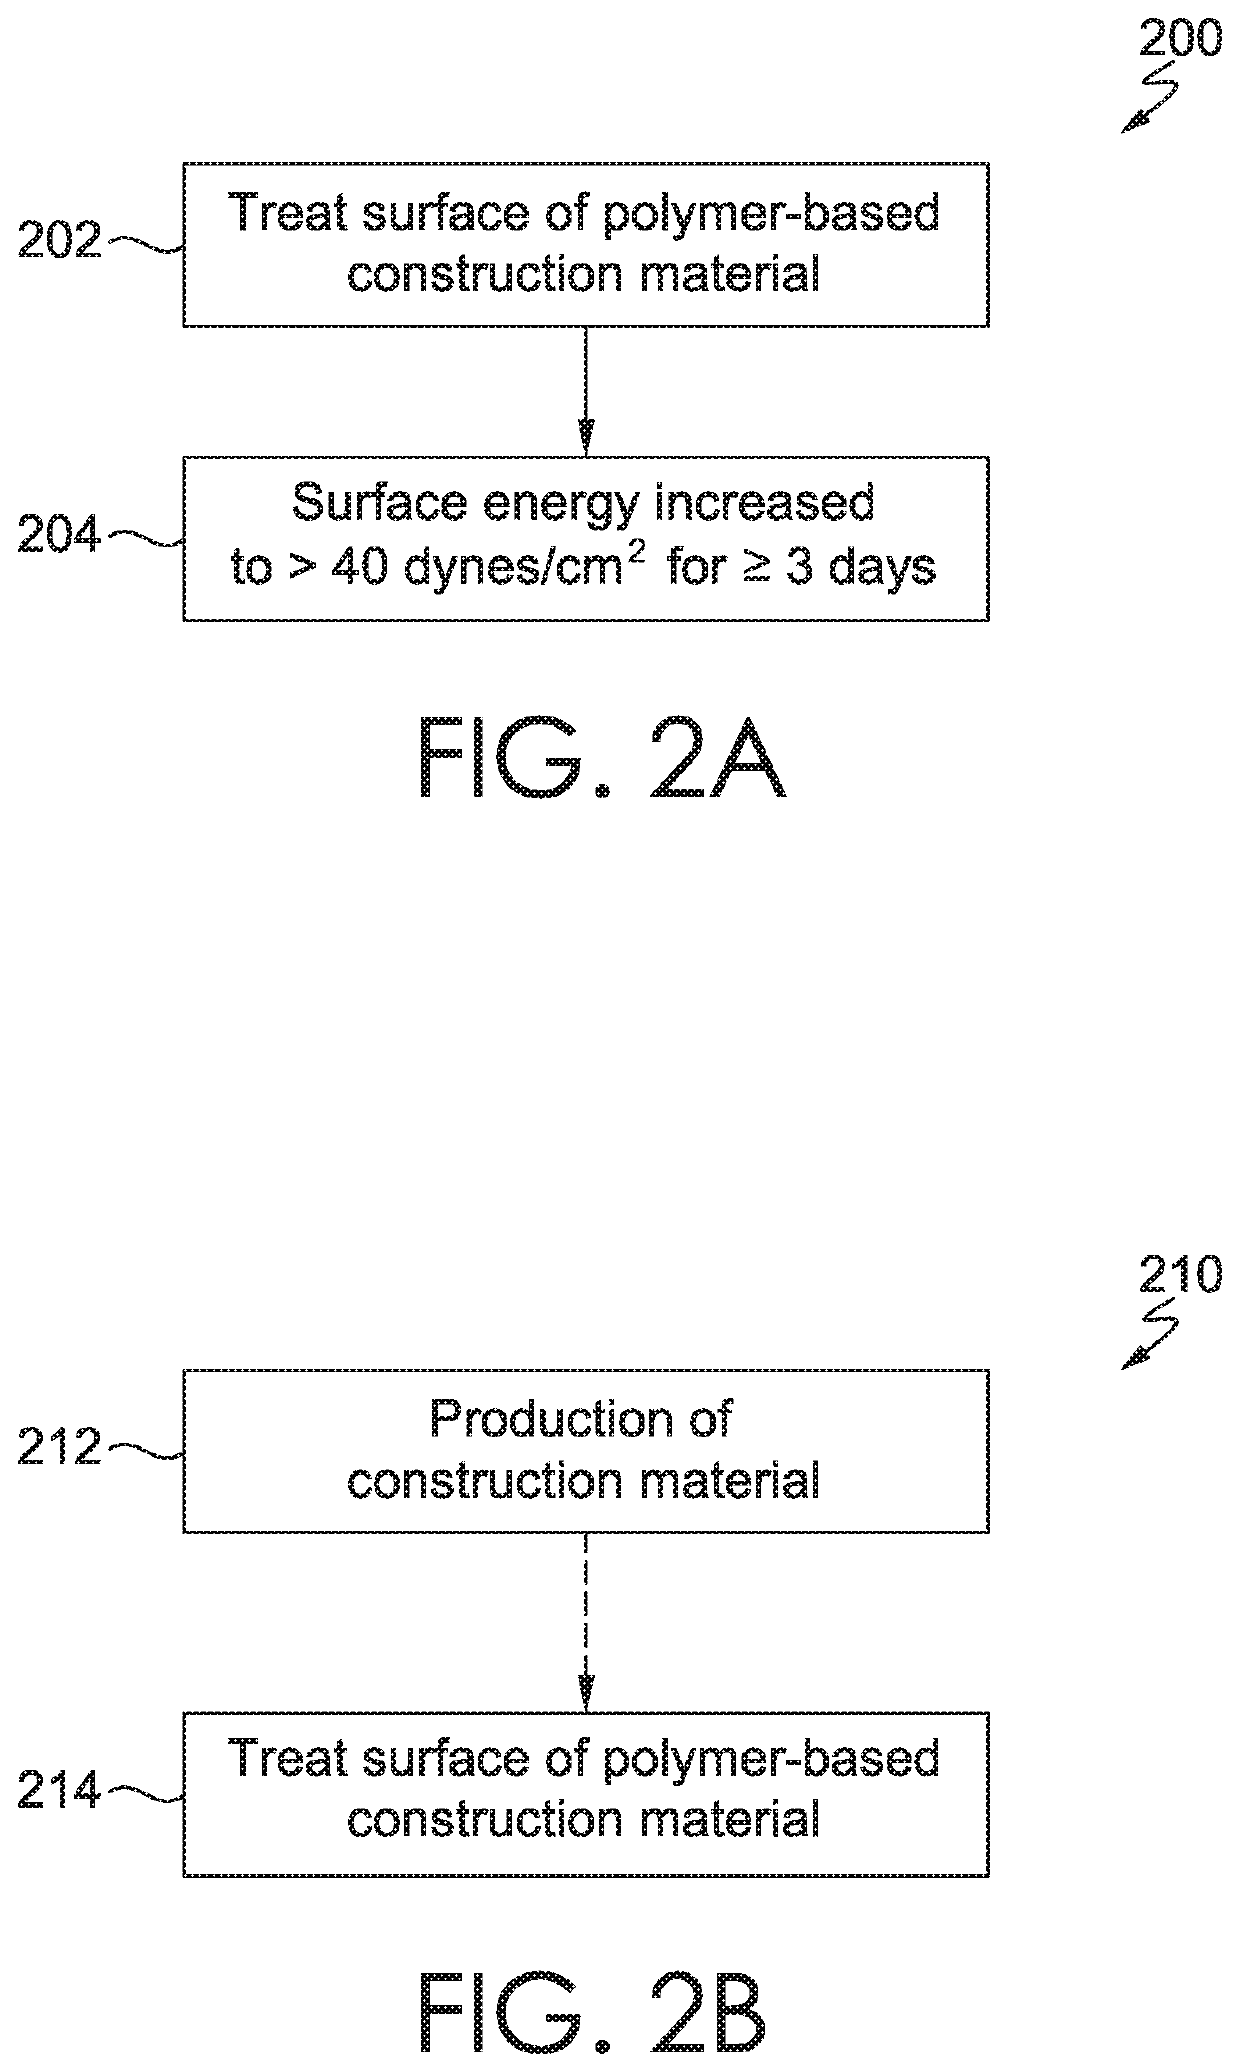 Polymer-based construction materials